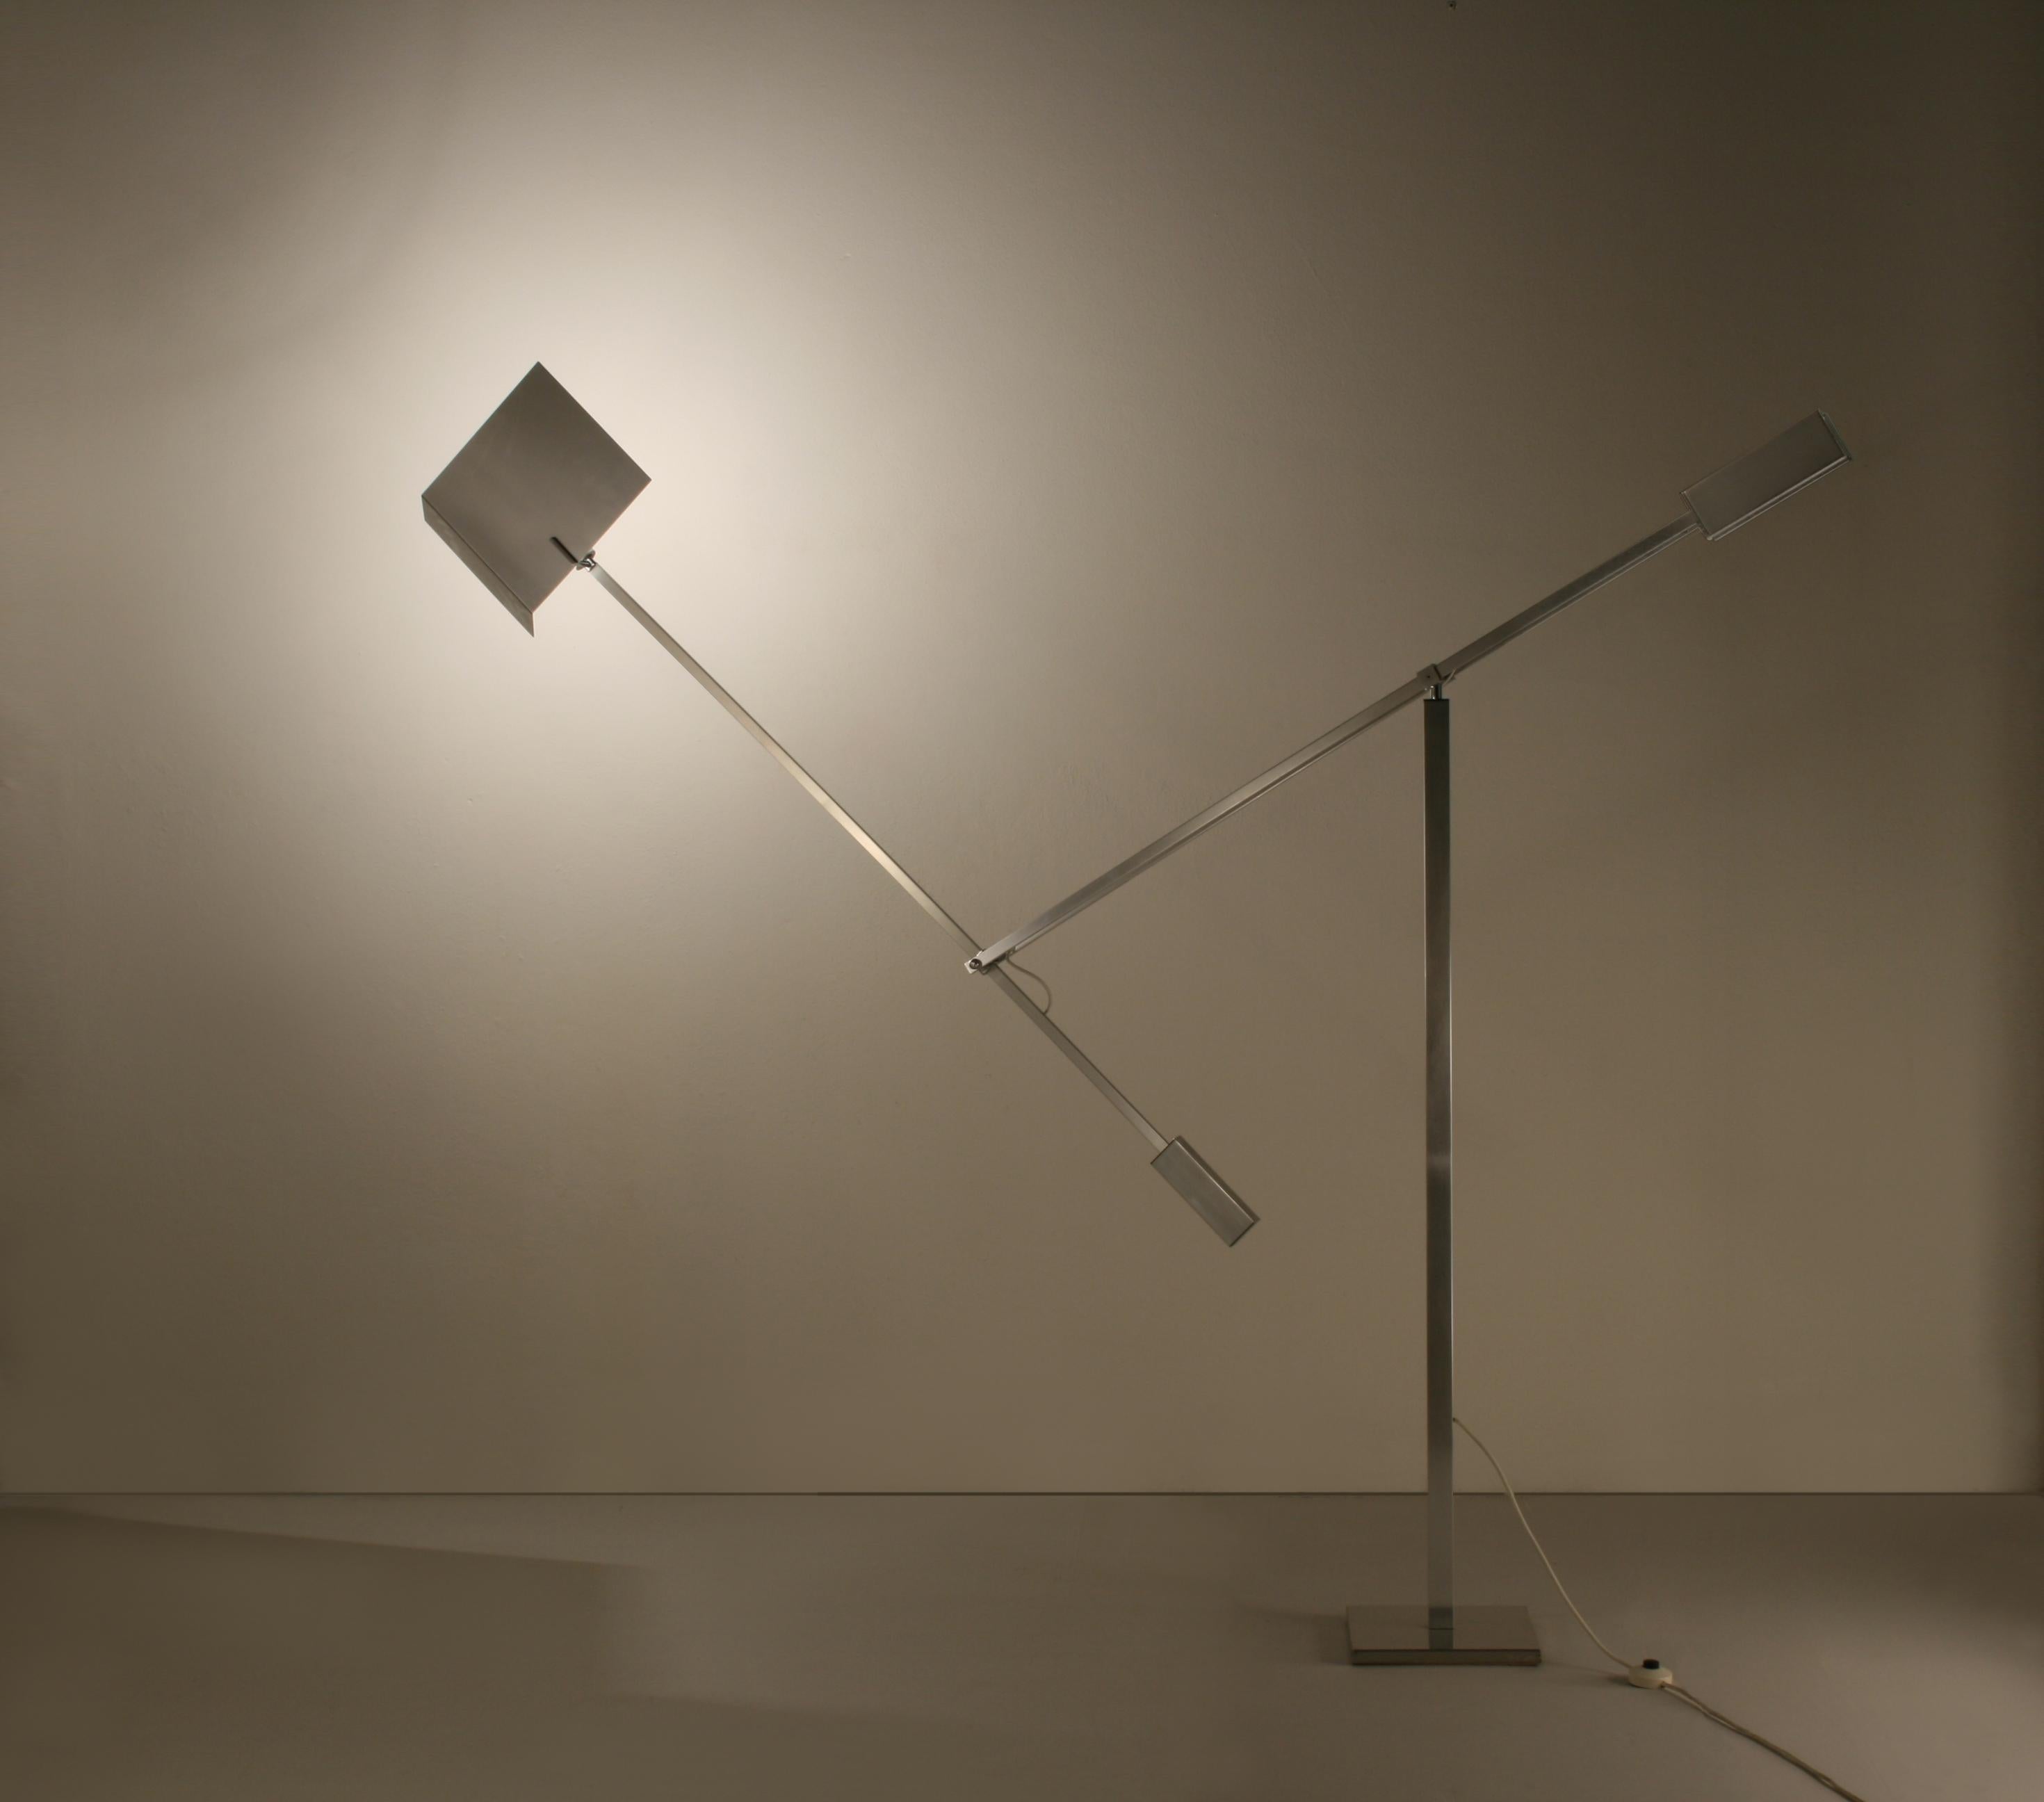 Genius, intuition, balance. Giraffa is an adjustable and extendable aluminum floor lamp with chromed brass details. A system of counterweights makes it possible for the lamp to be placed in endless configurations. A boom microphone used in TV